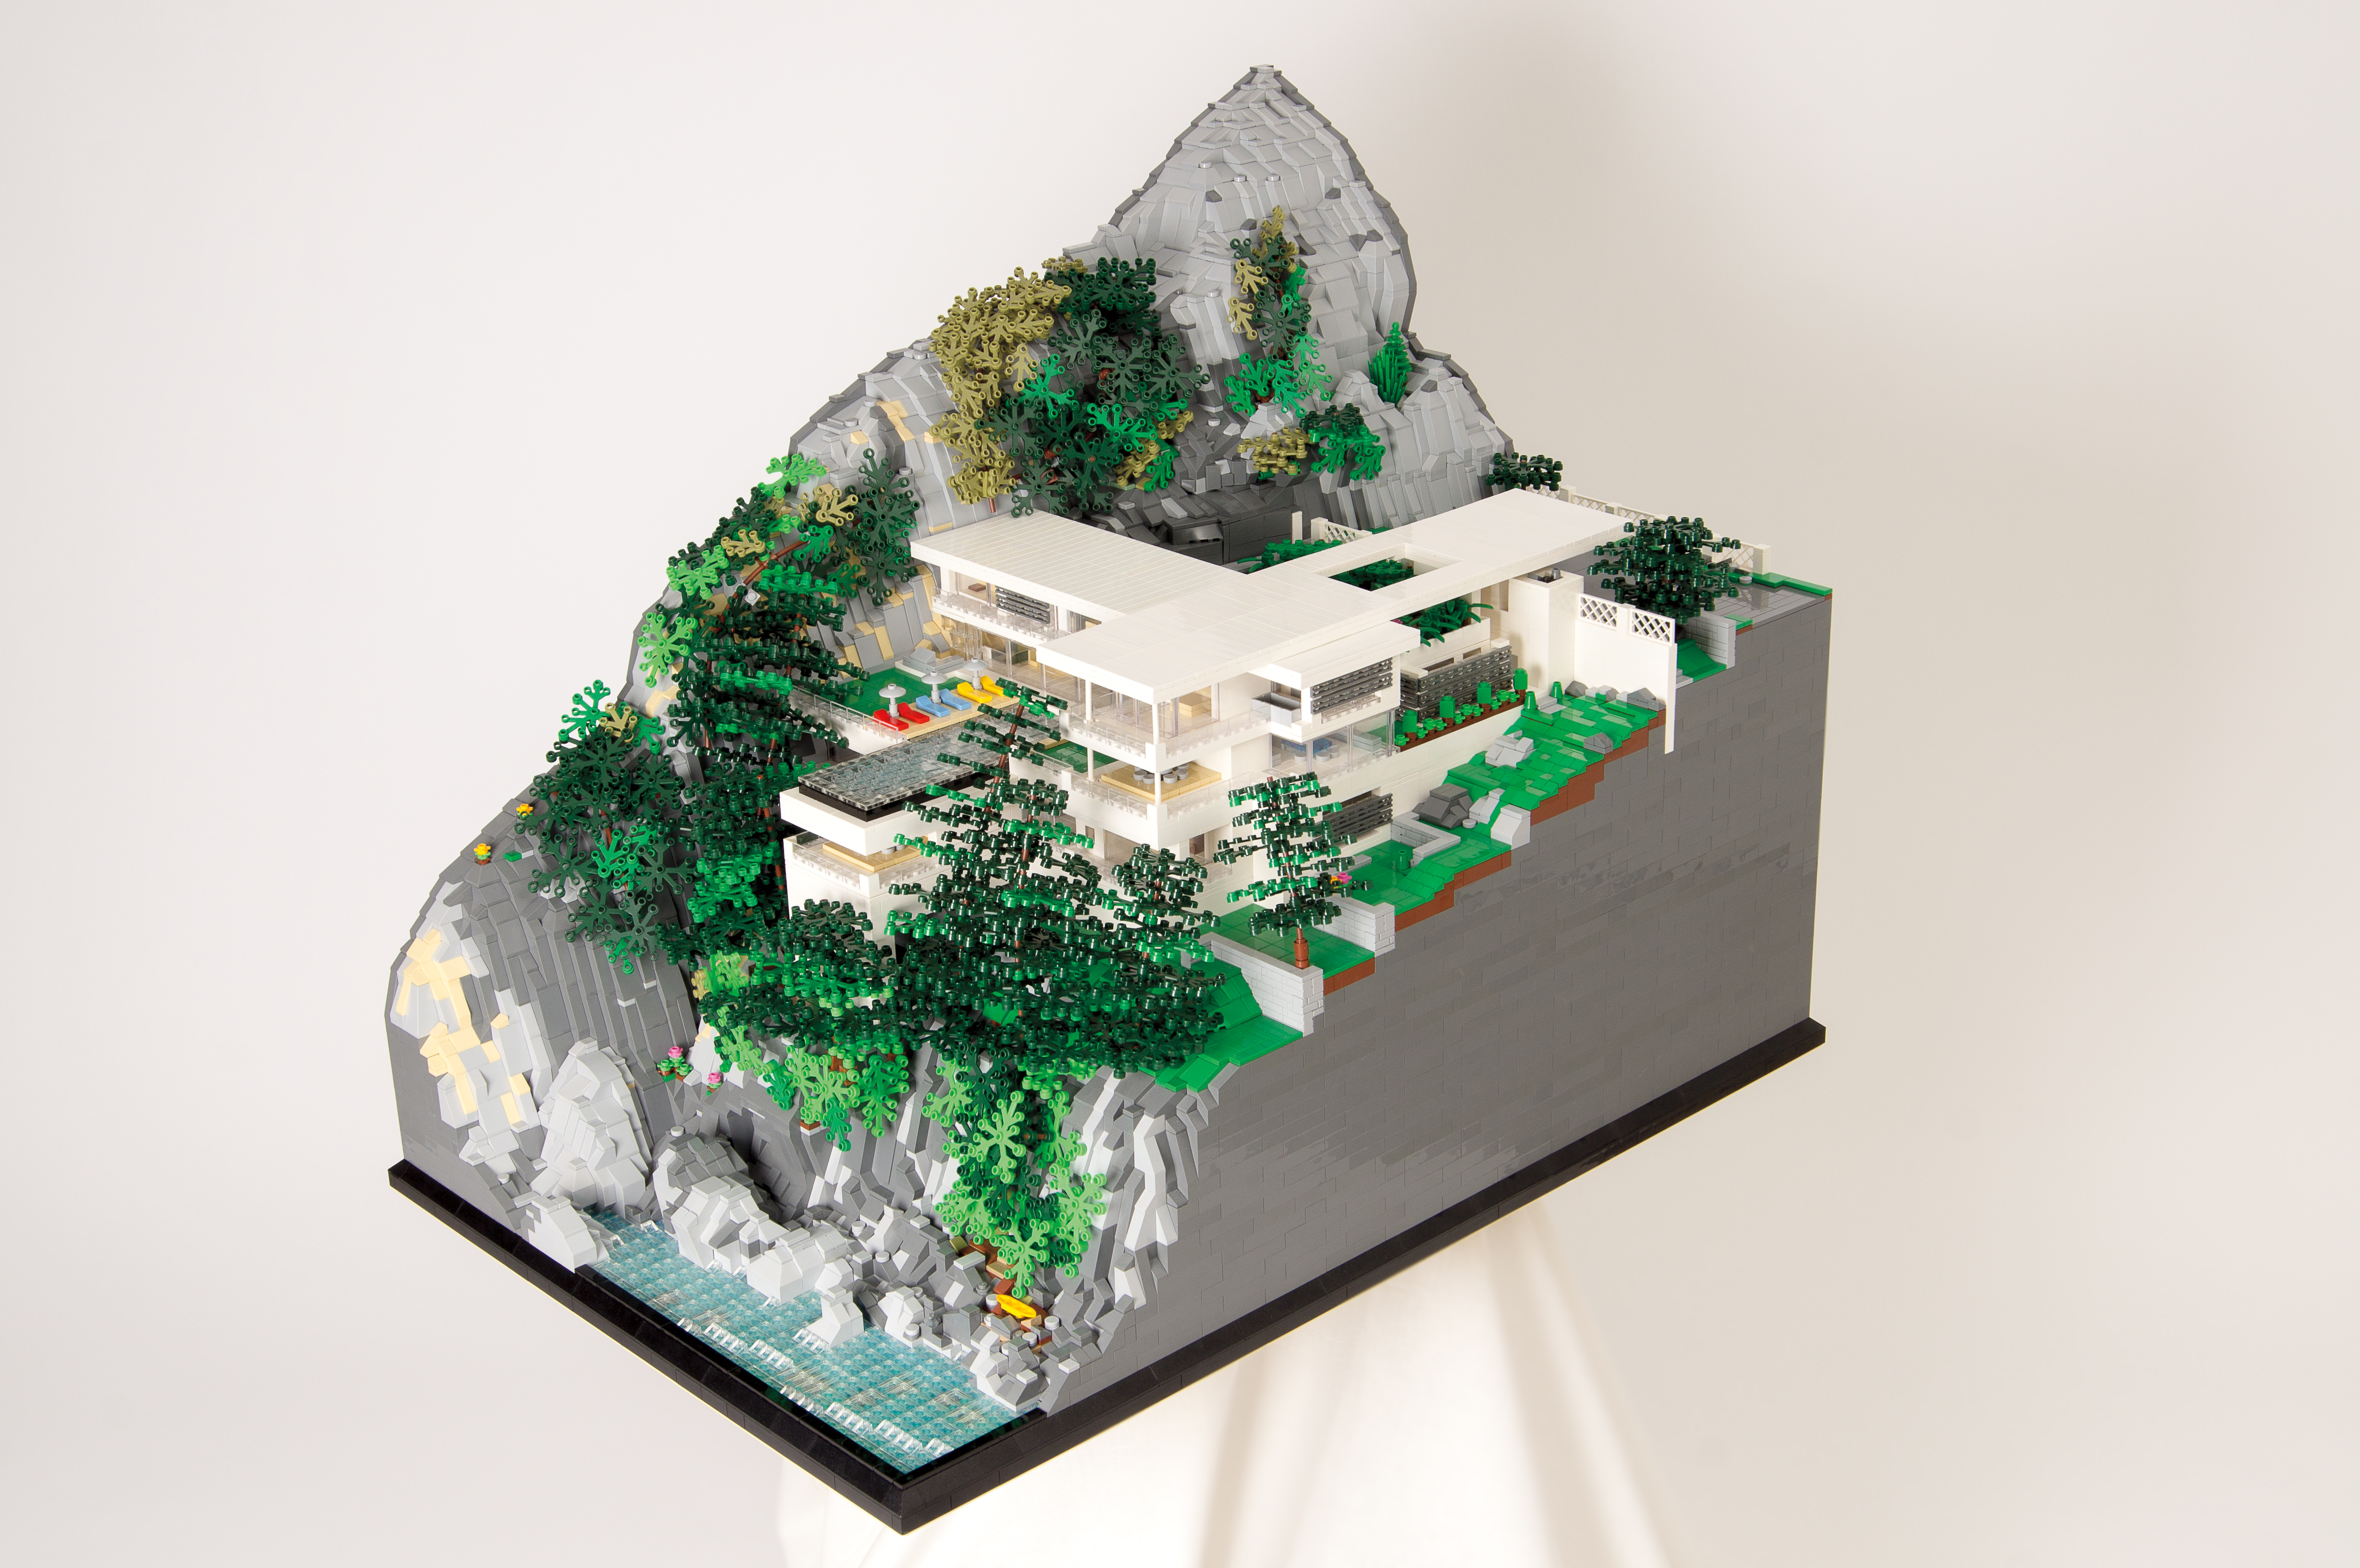 Lego architects and super-fans on creating the perfect miniature - CNN Style